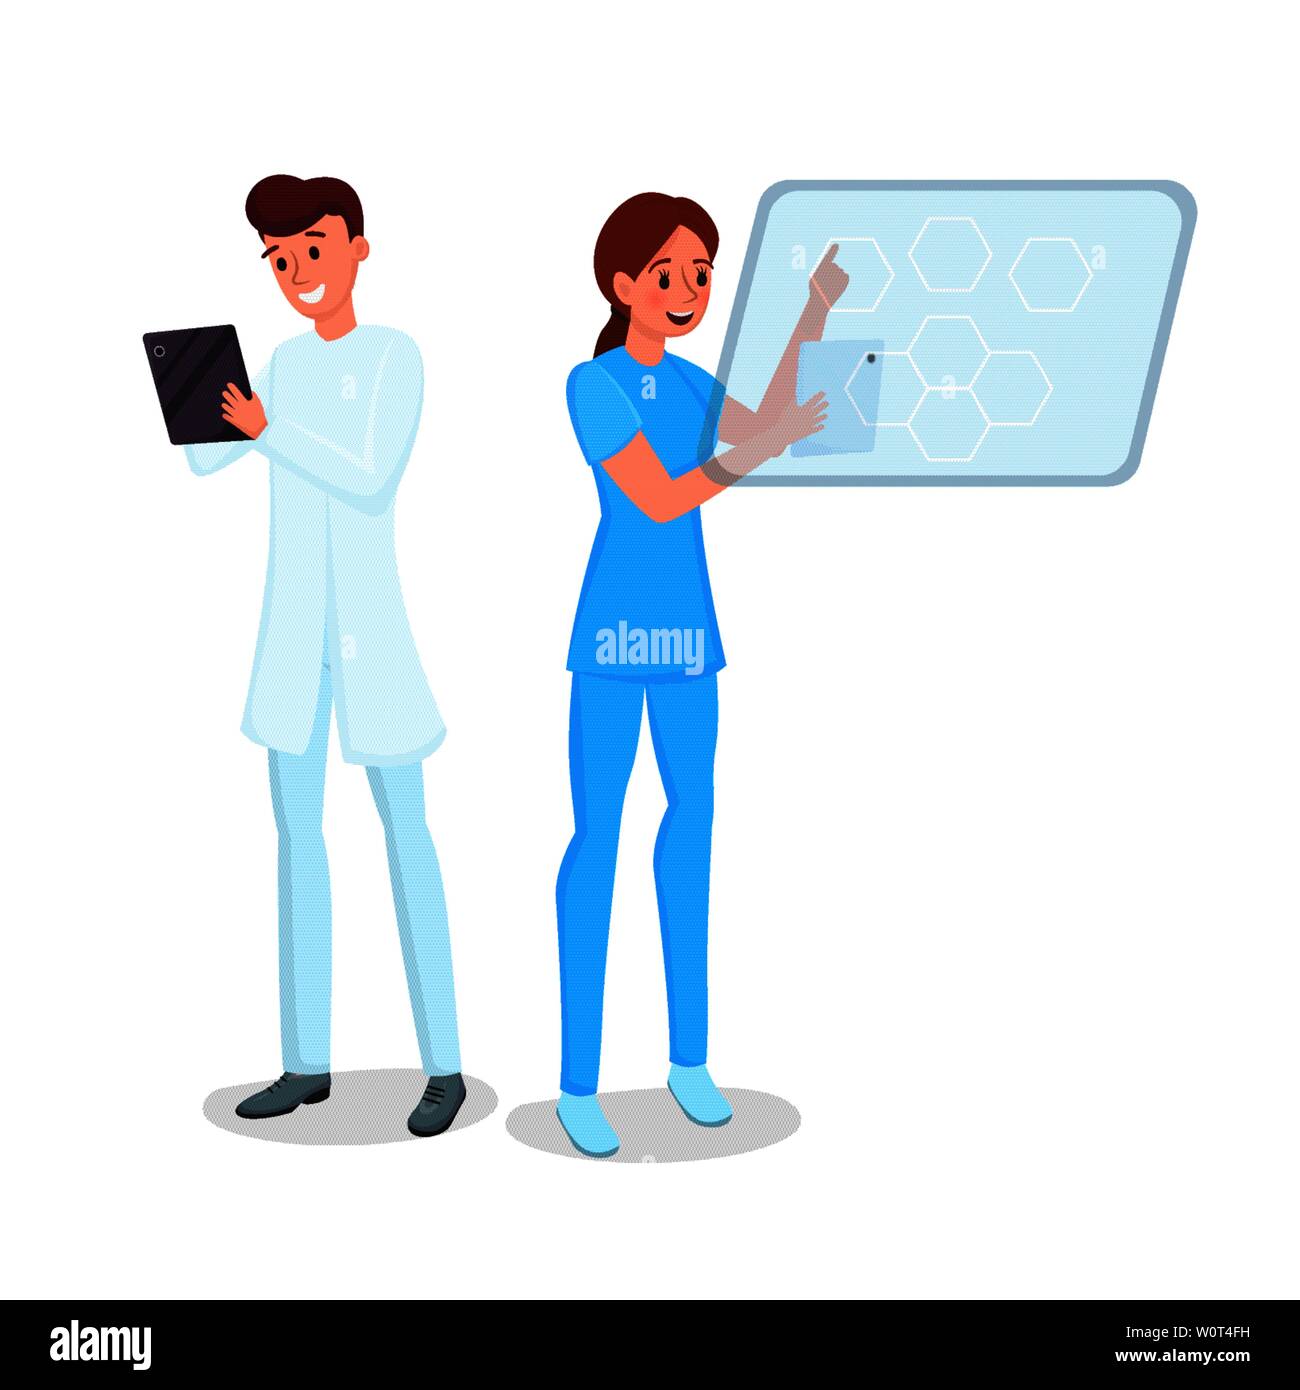 Medicine computerization flat vector illustration. Smiling young doctor and nurse with tablets cartoon characters. Smart medics working with portable devices, hospital staff with modern gadgets Stock Vector